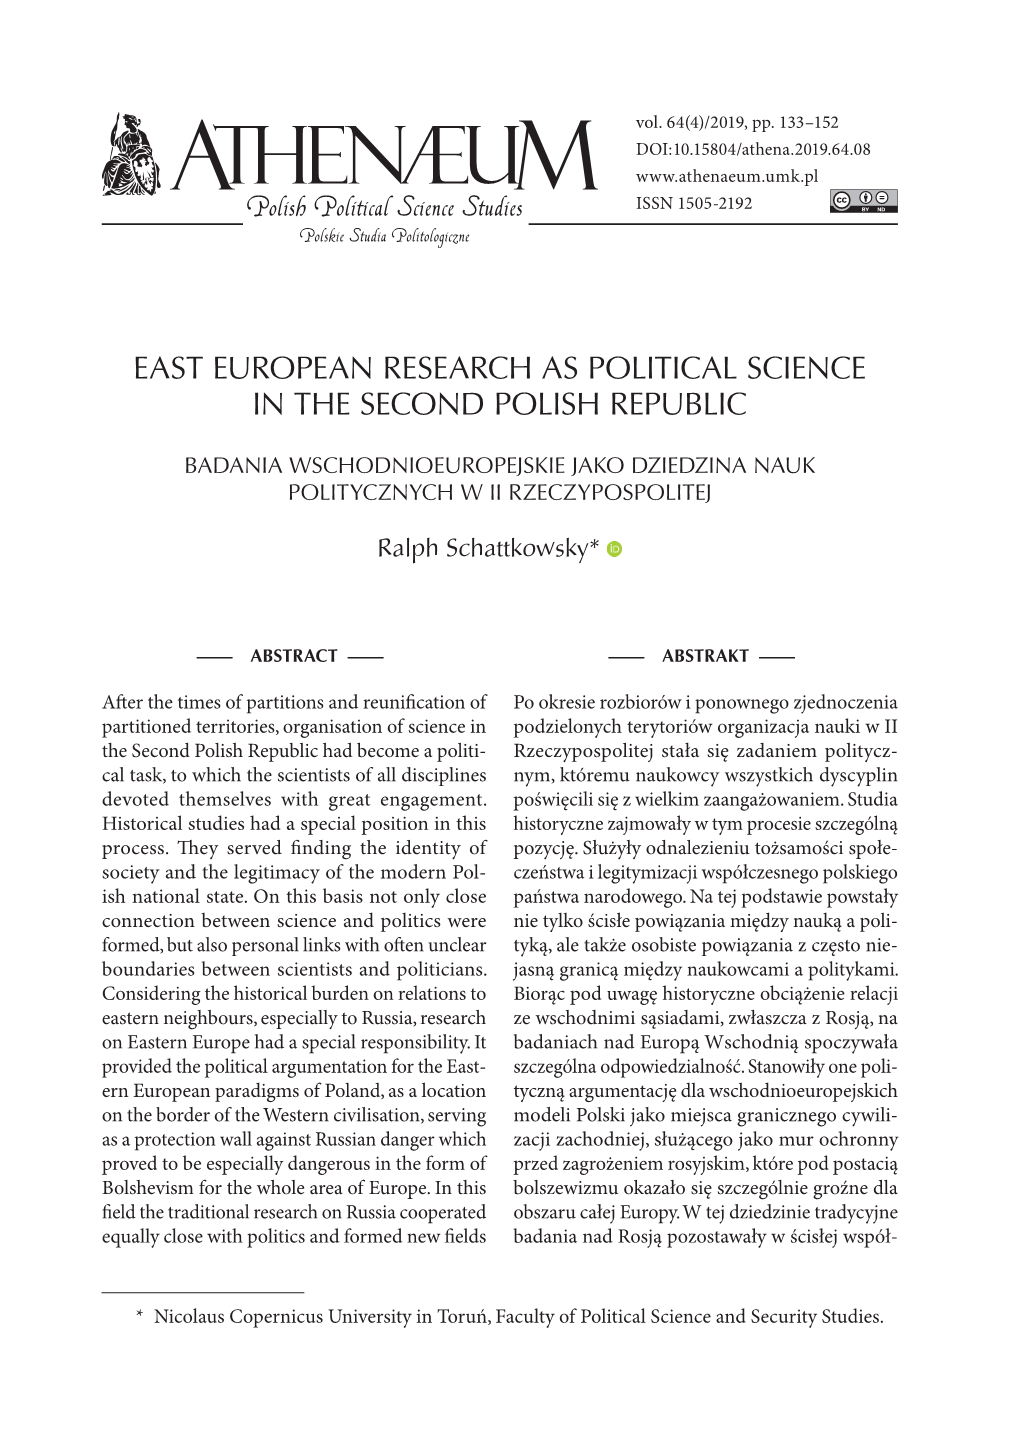 East European Research As Political Sciencein the Second Polish